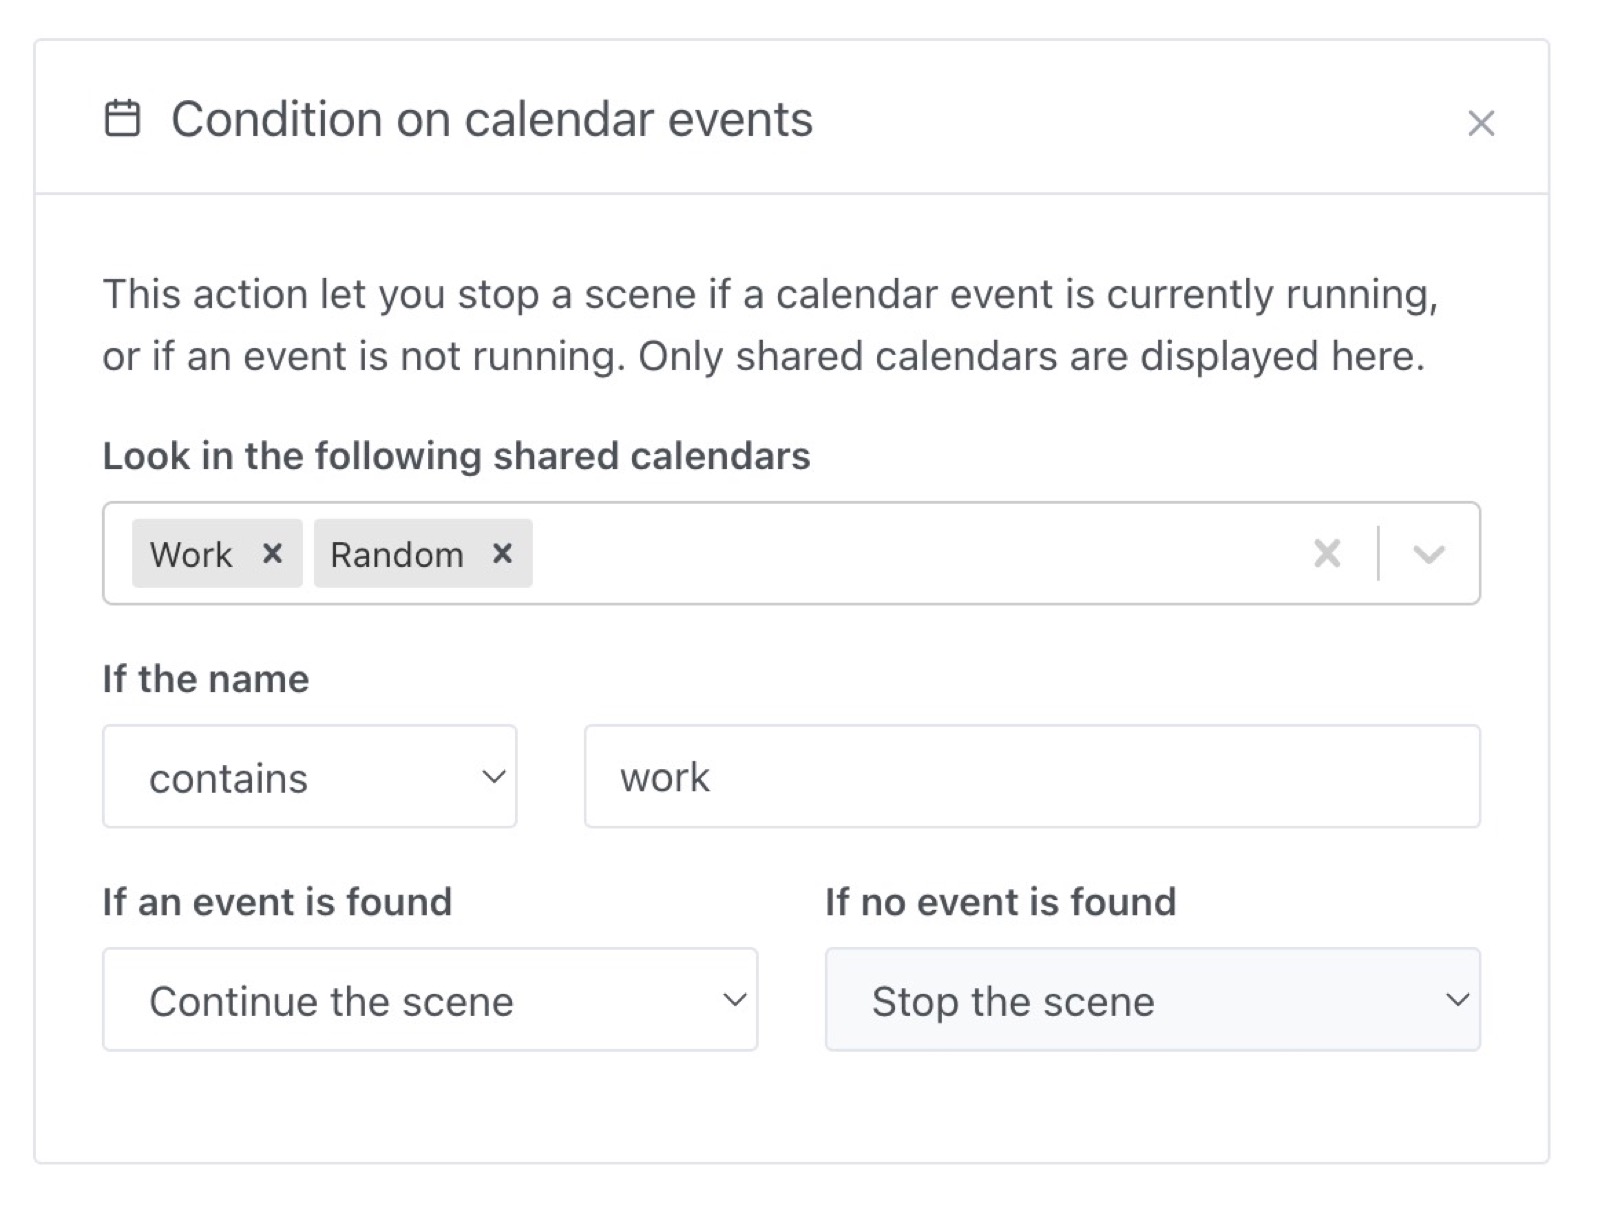 Calendar event is running condition